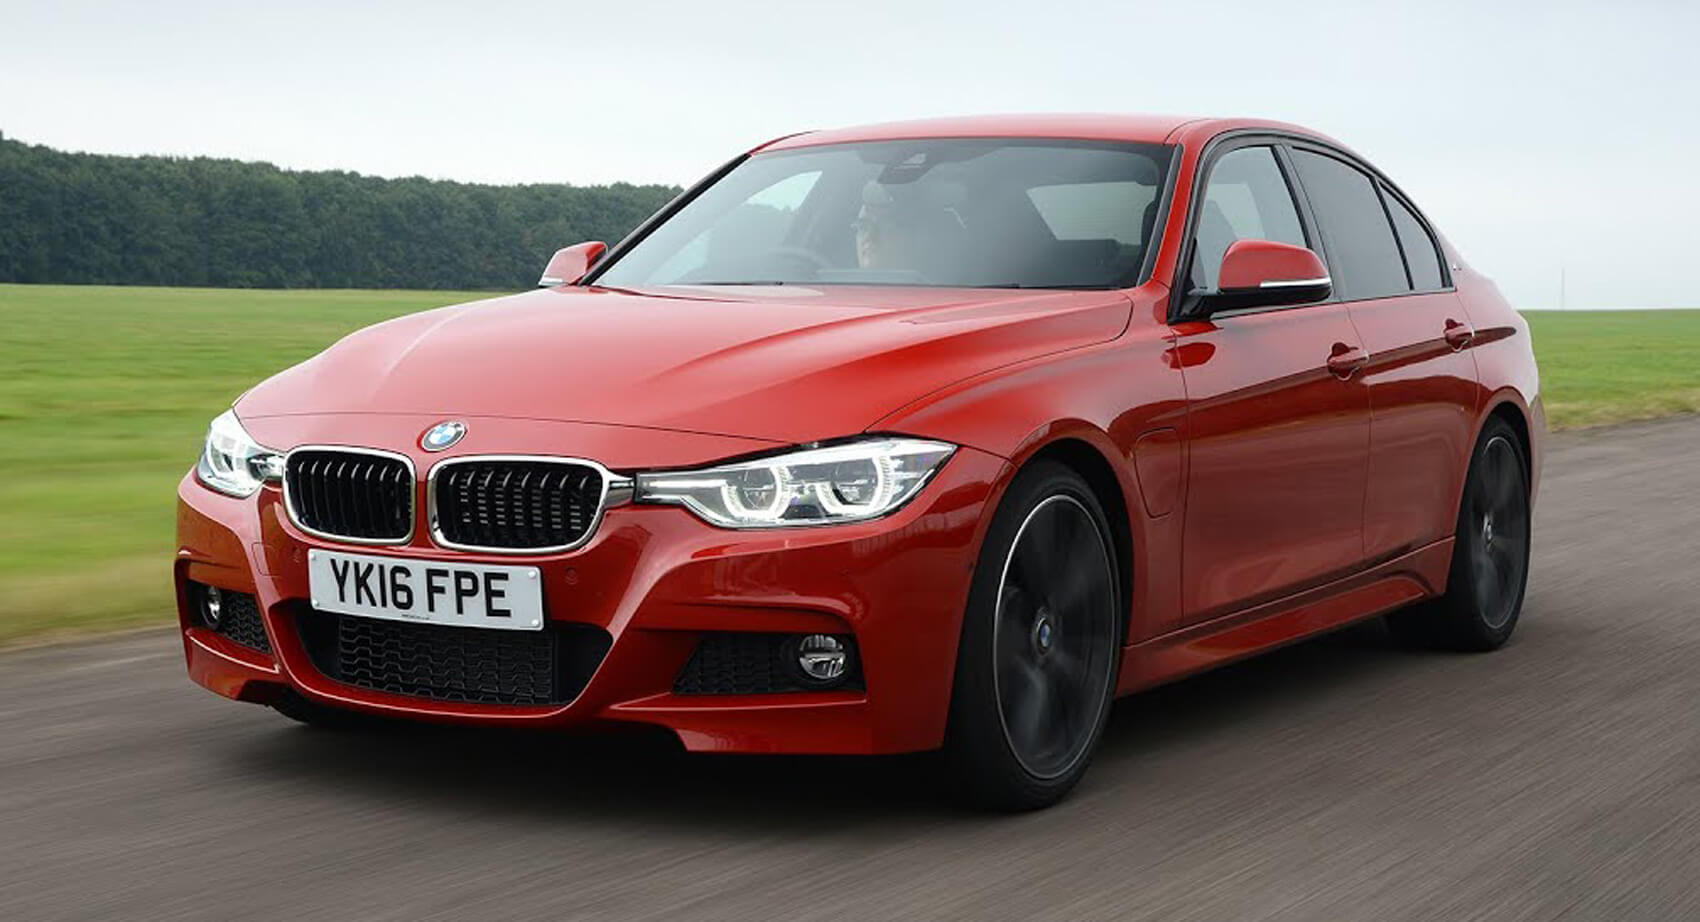 Want To Buy A Used BMW 3-Series F3X? Here's What To Look For